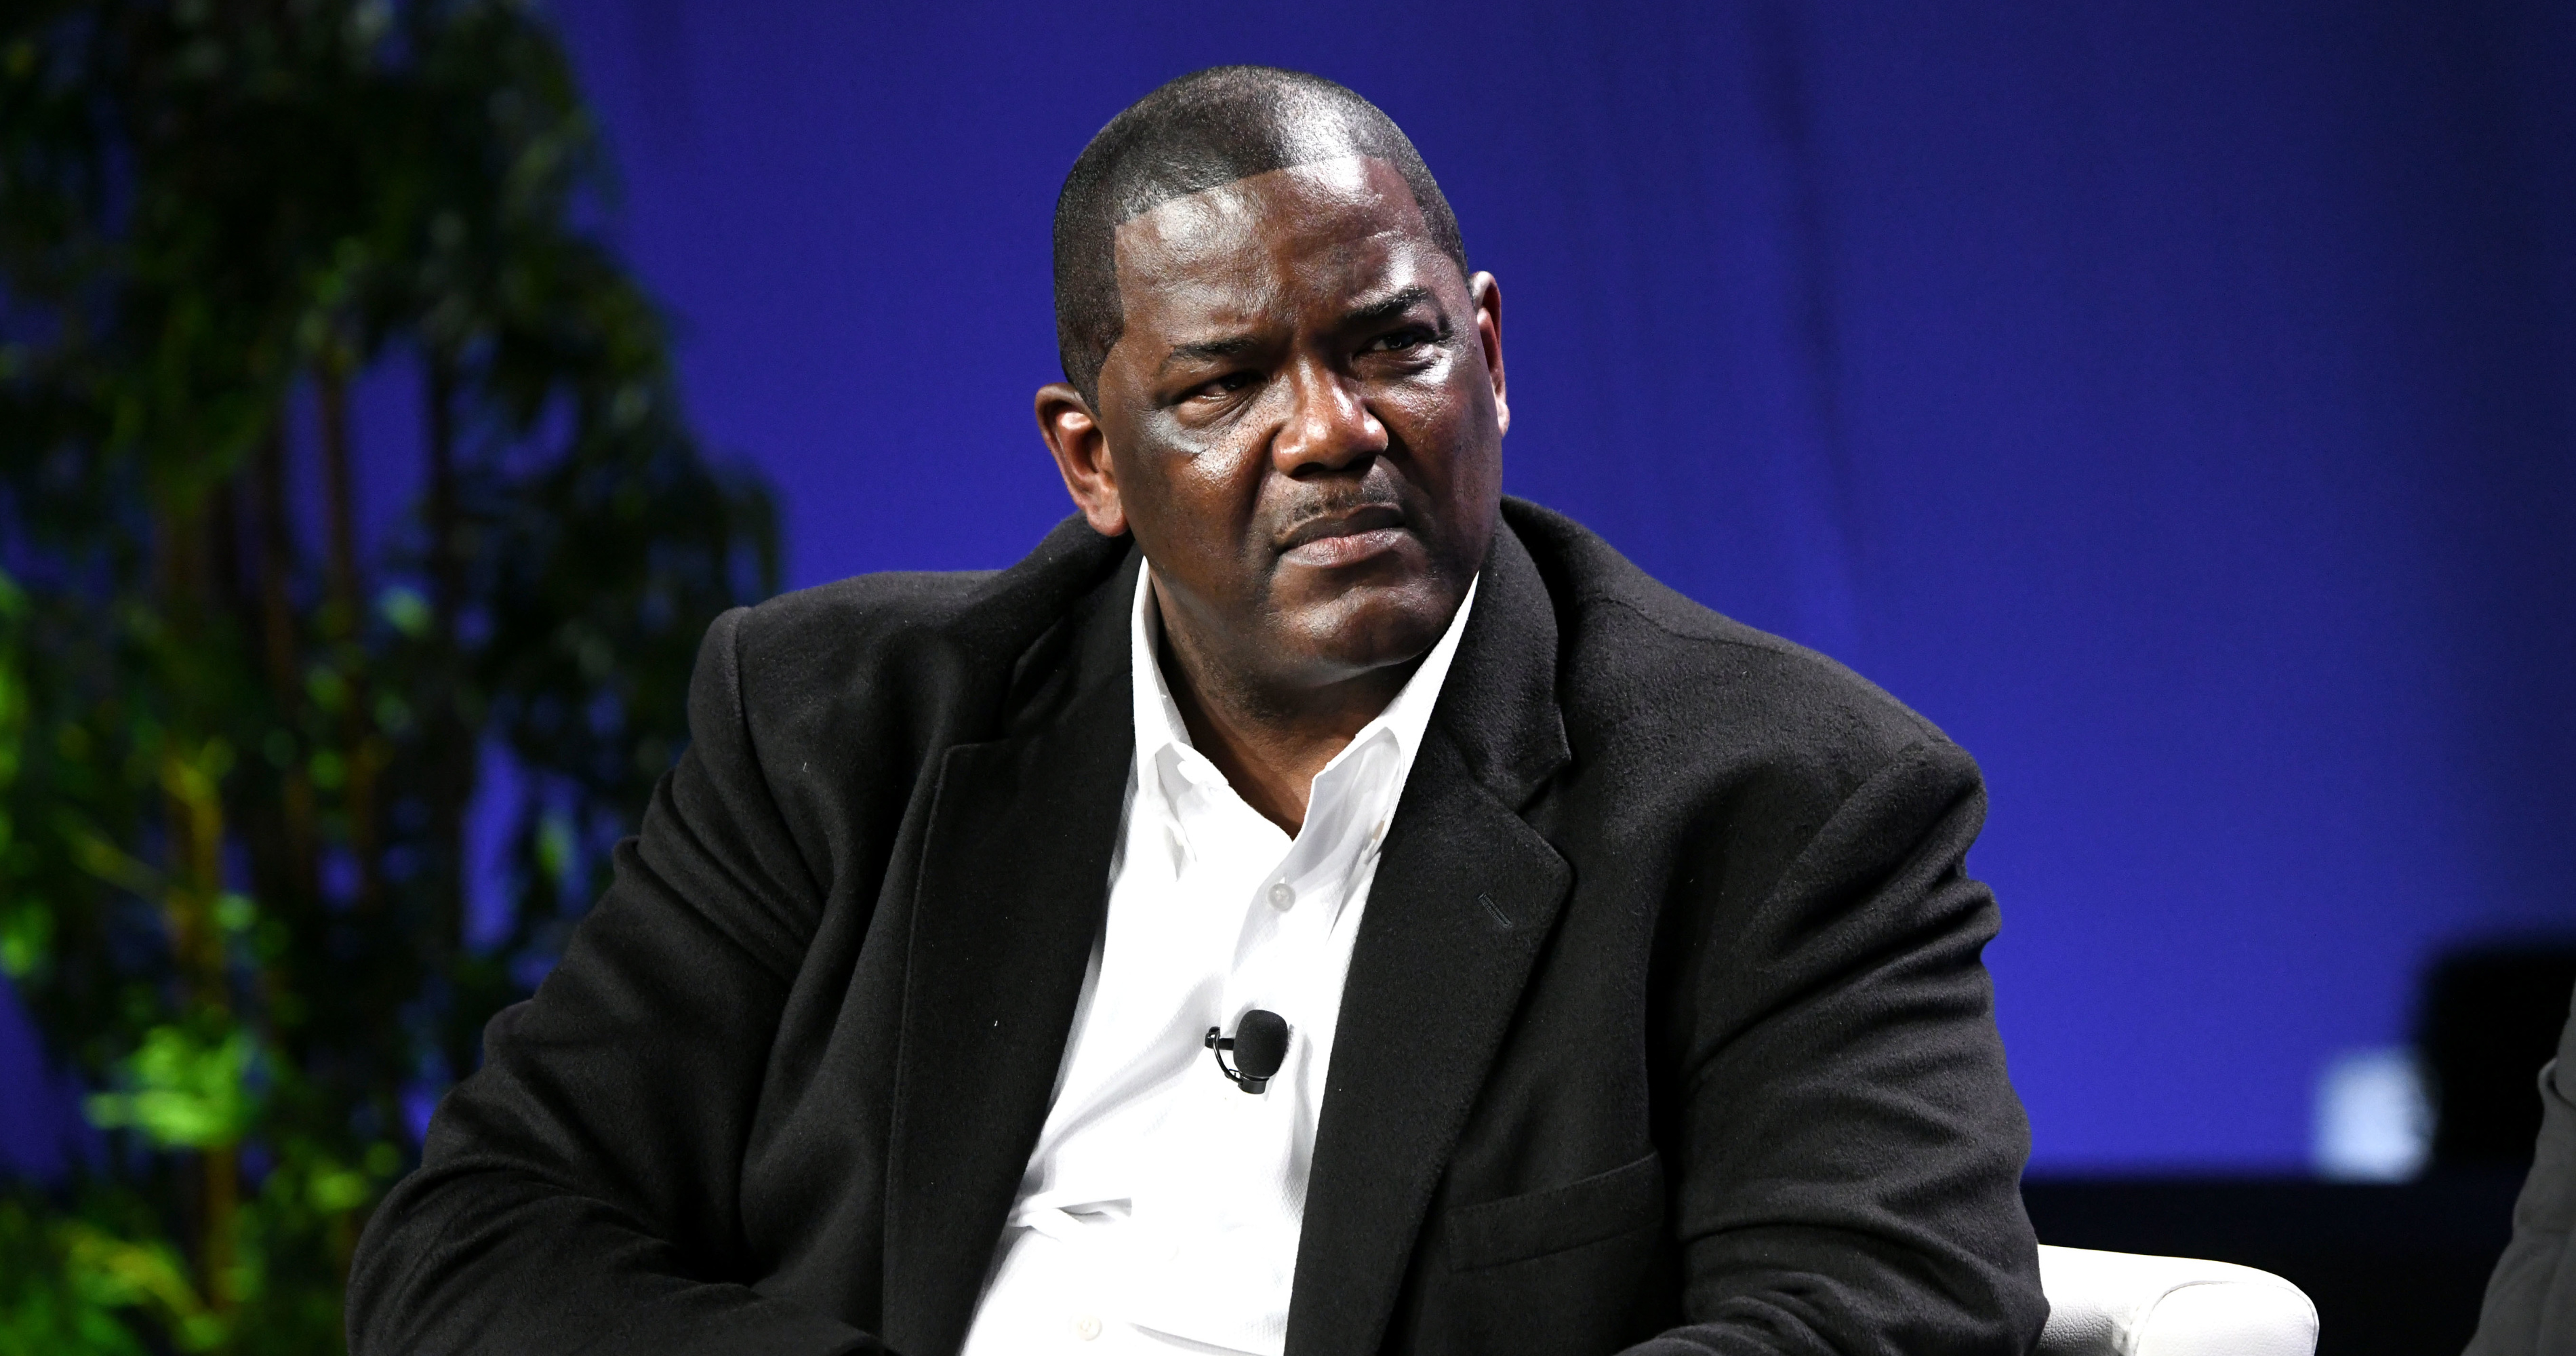 Joe Dumars and his new NBA job: What is his new role?